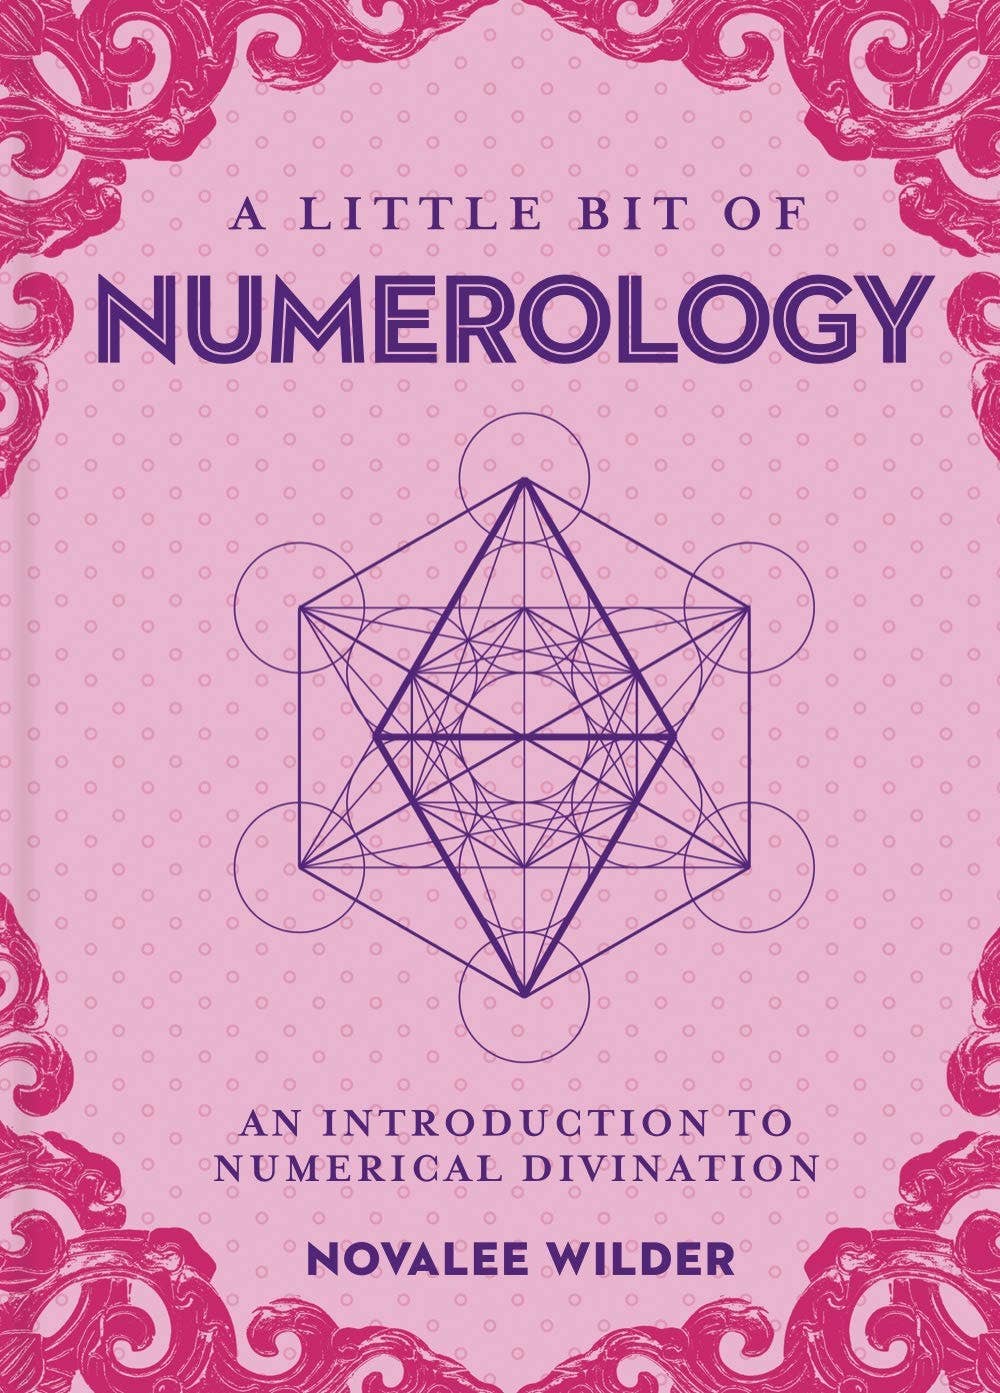 A Little Bit of Numerology by Novalee Wilder - Spiral Circle